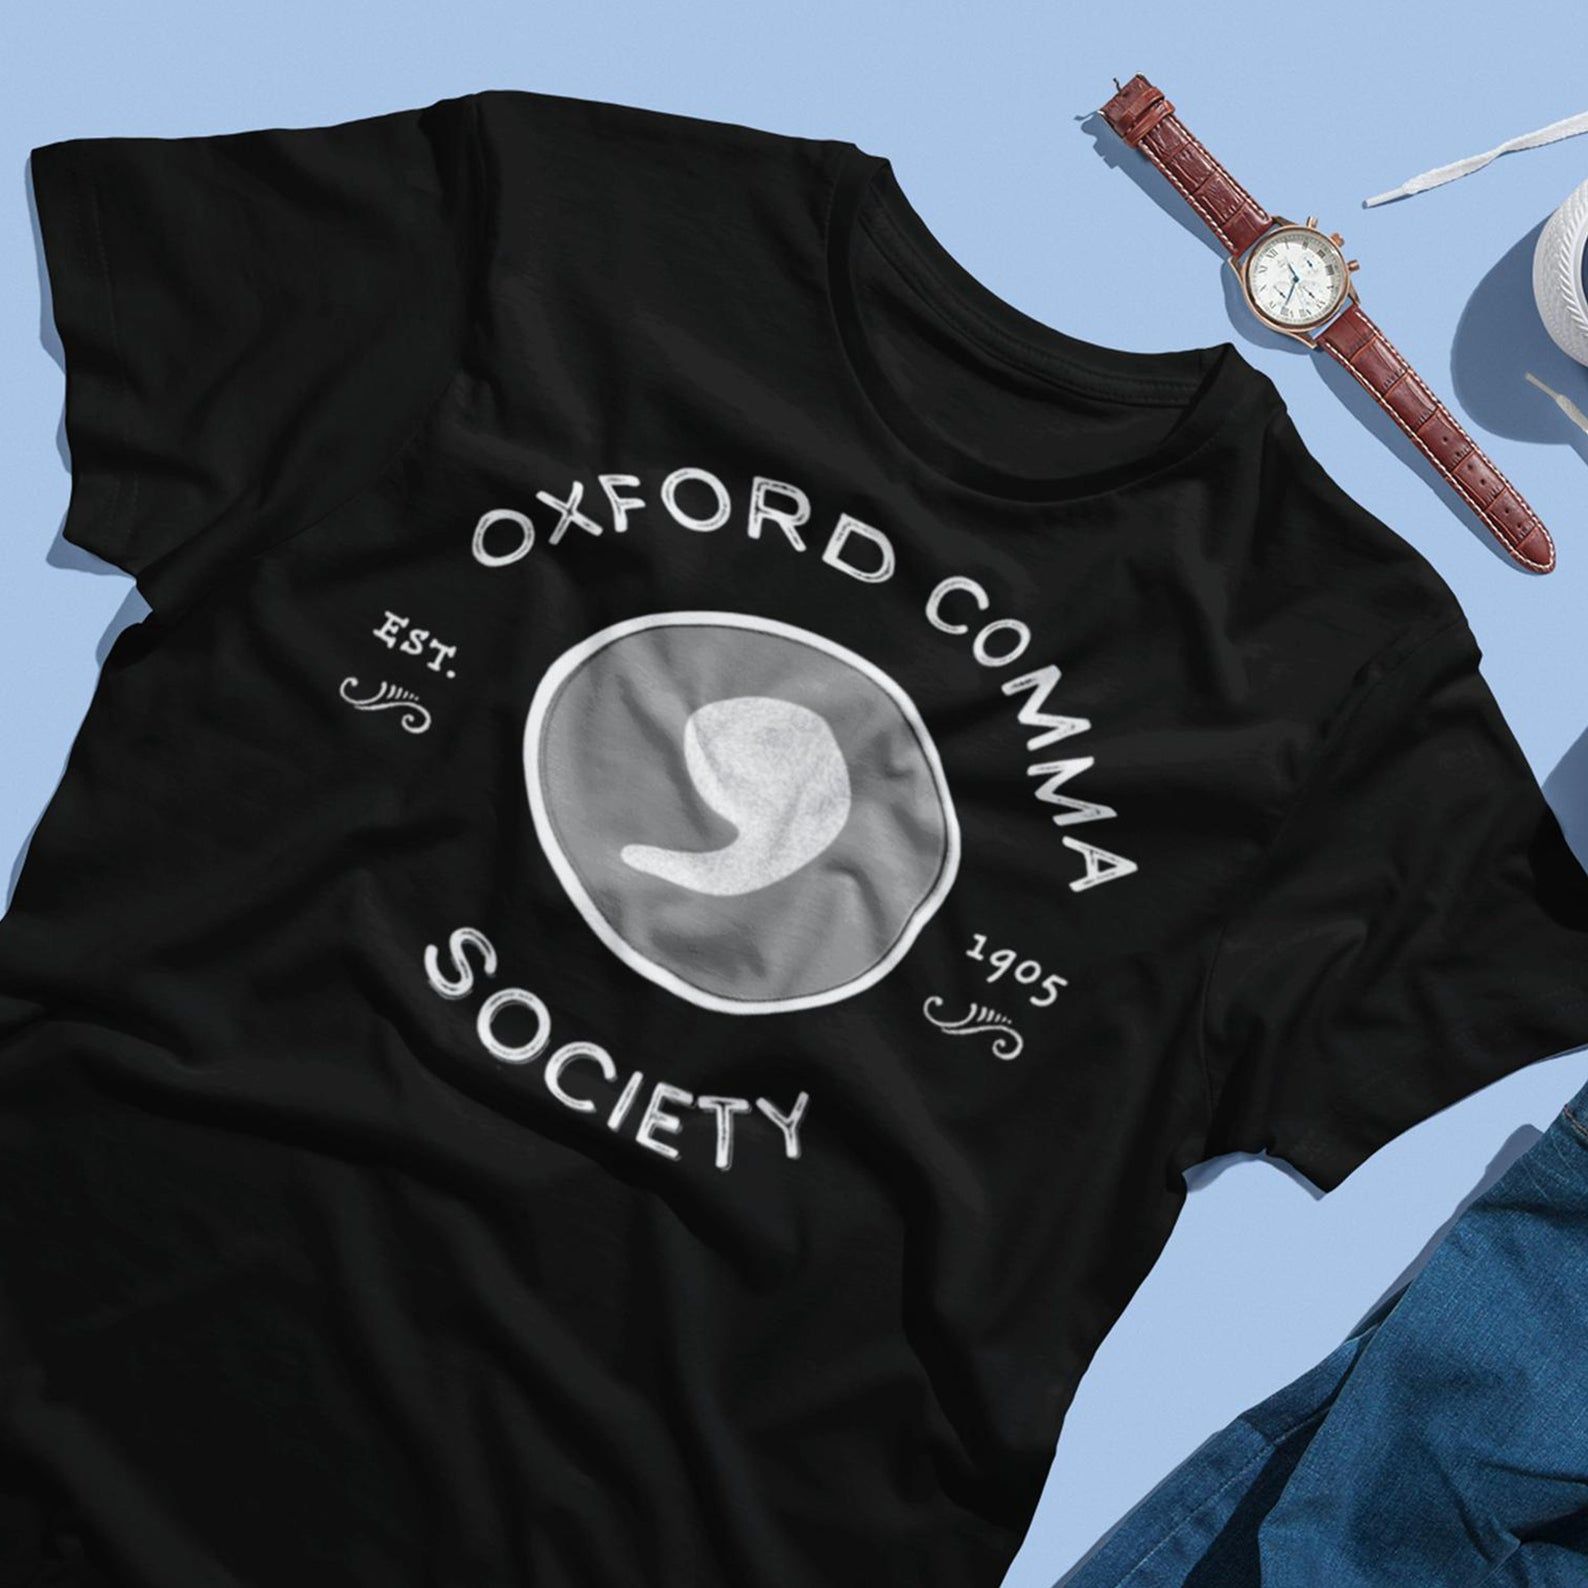 Black, Oxford Comma Society t-shirt laid out on a blue background